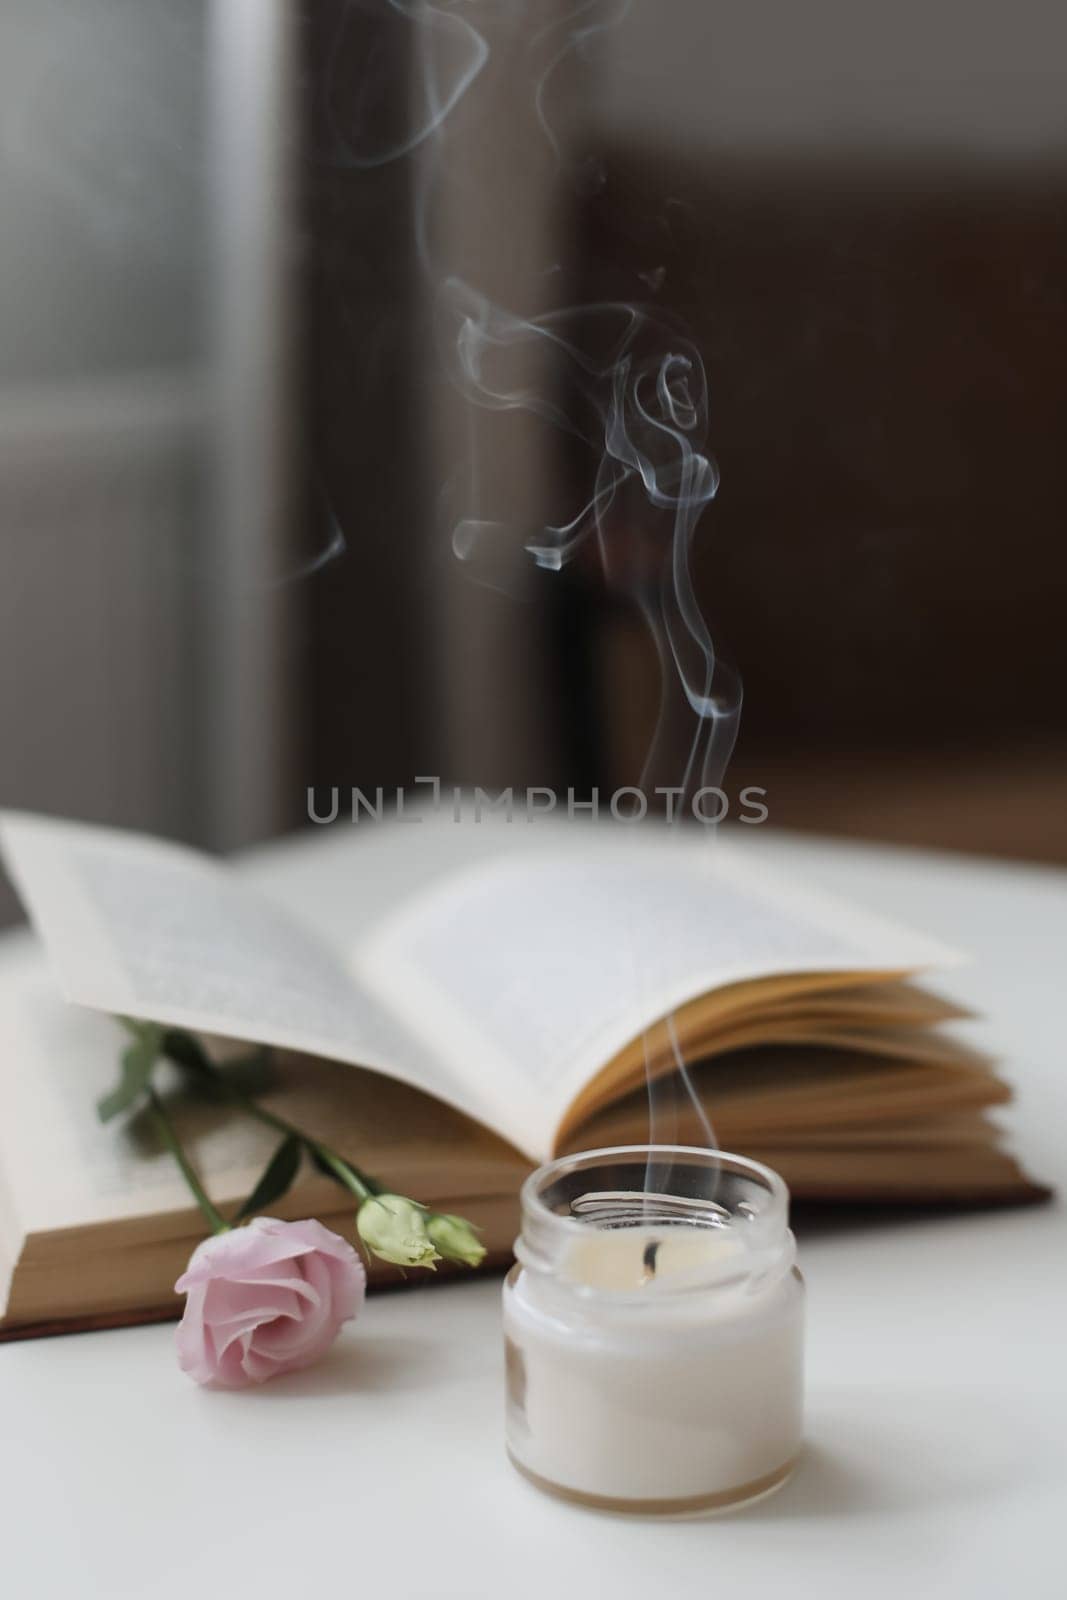 Details of still life in the home interior of living room. Flowers, book, candle. Moody. Cozy spring concept.